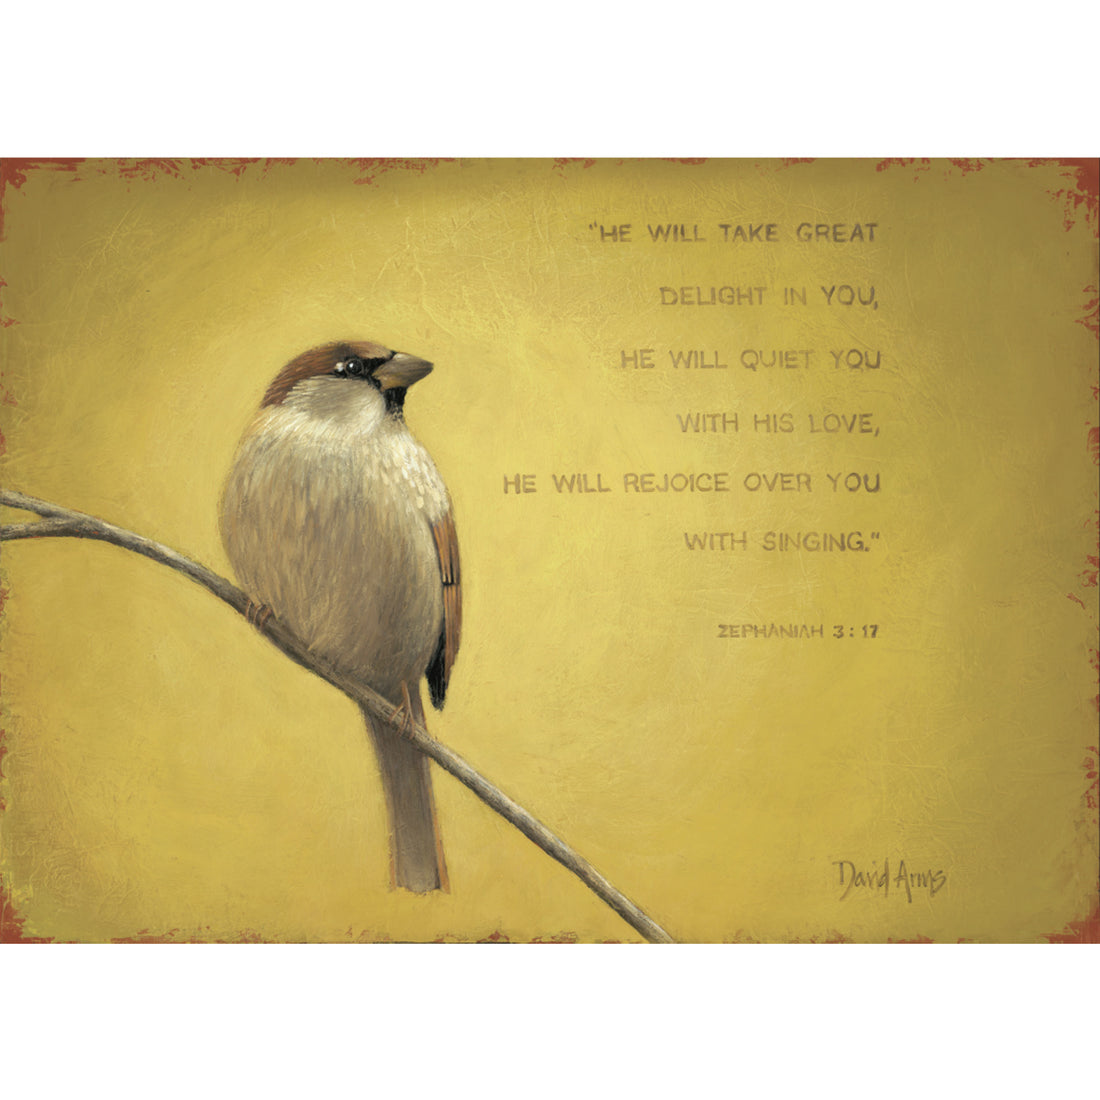 An illustration of a sparrow resting on a twig over a tan-yellow background with the Bible quote &quot;Zephaniah 3:17&quot; printed in brown to the right of the bird.